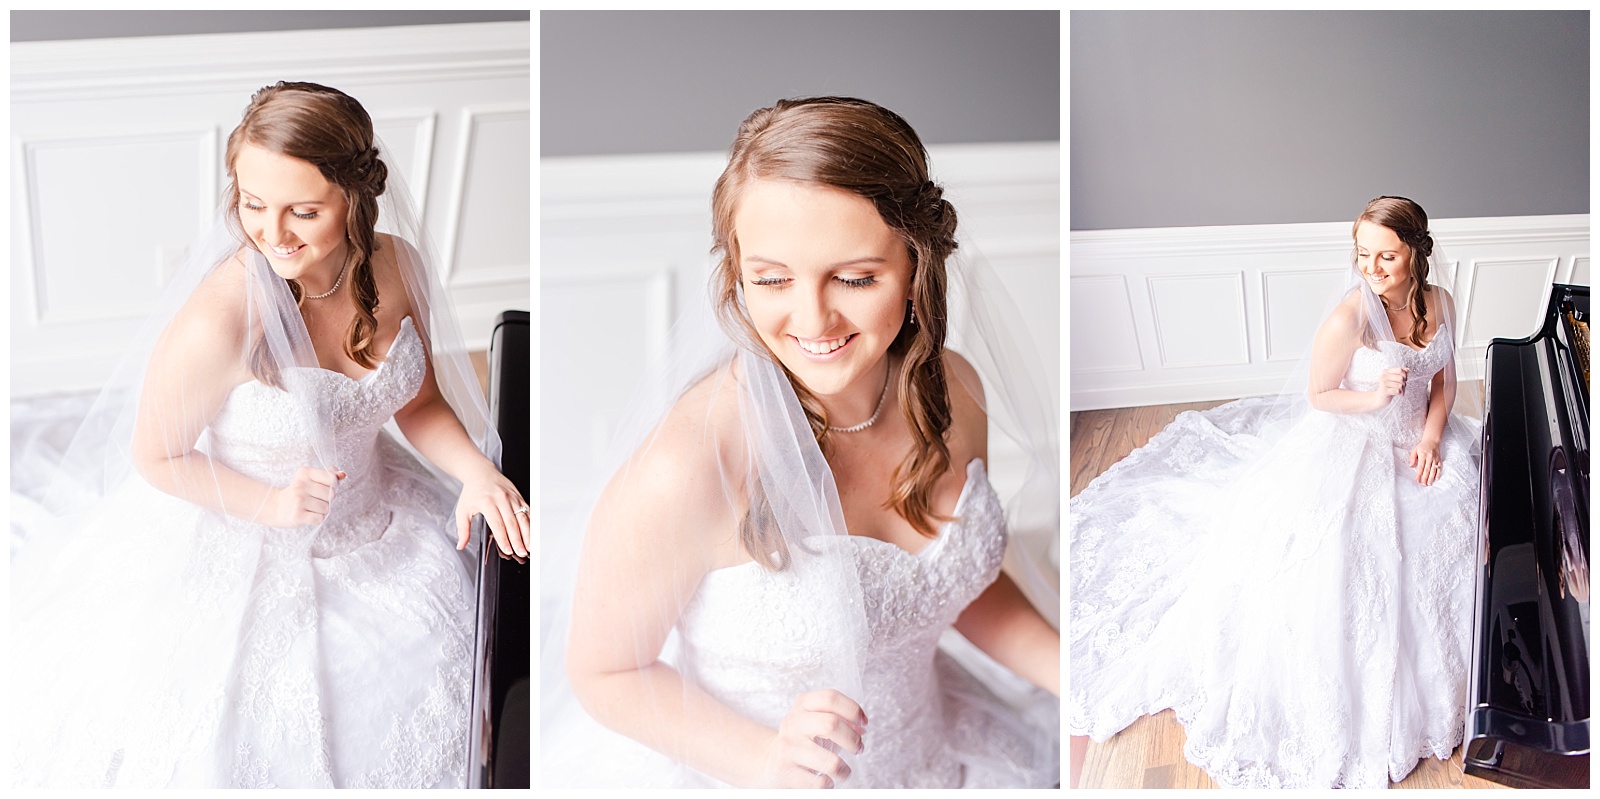 The Providence Cotton Mill-Bridal Portraits- Tasha Barbour Photography